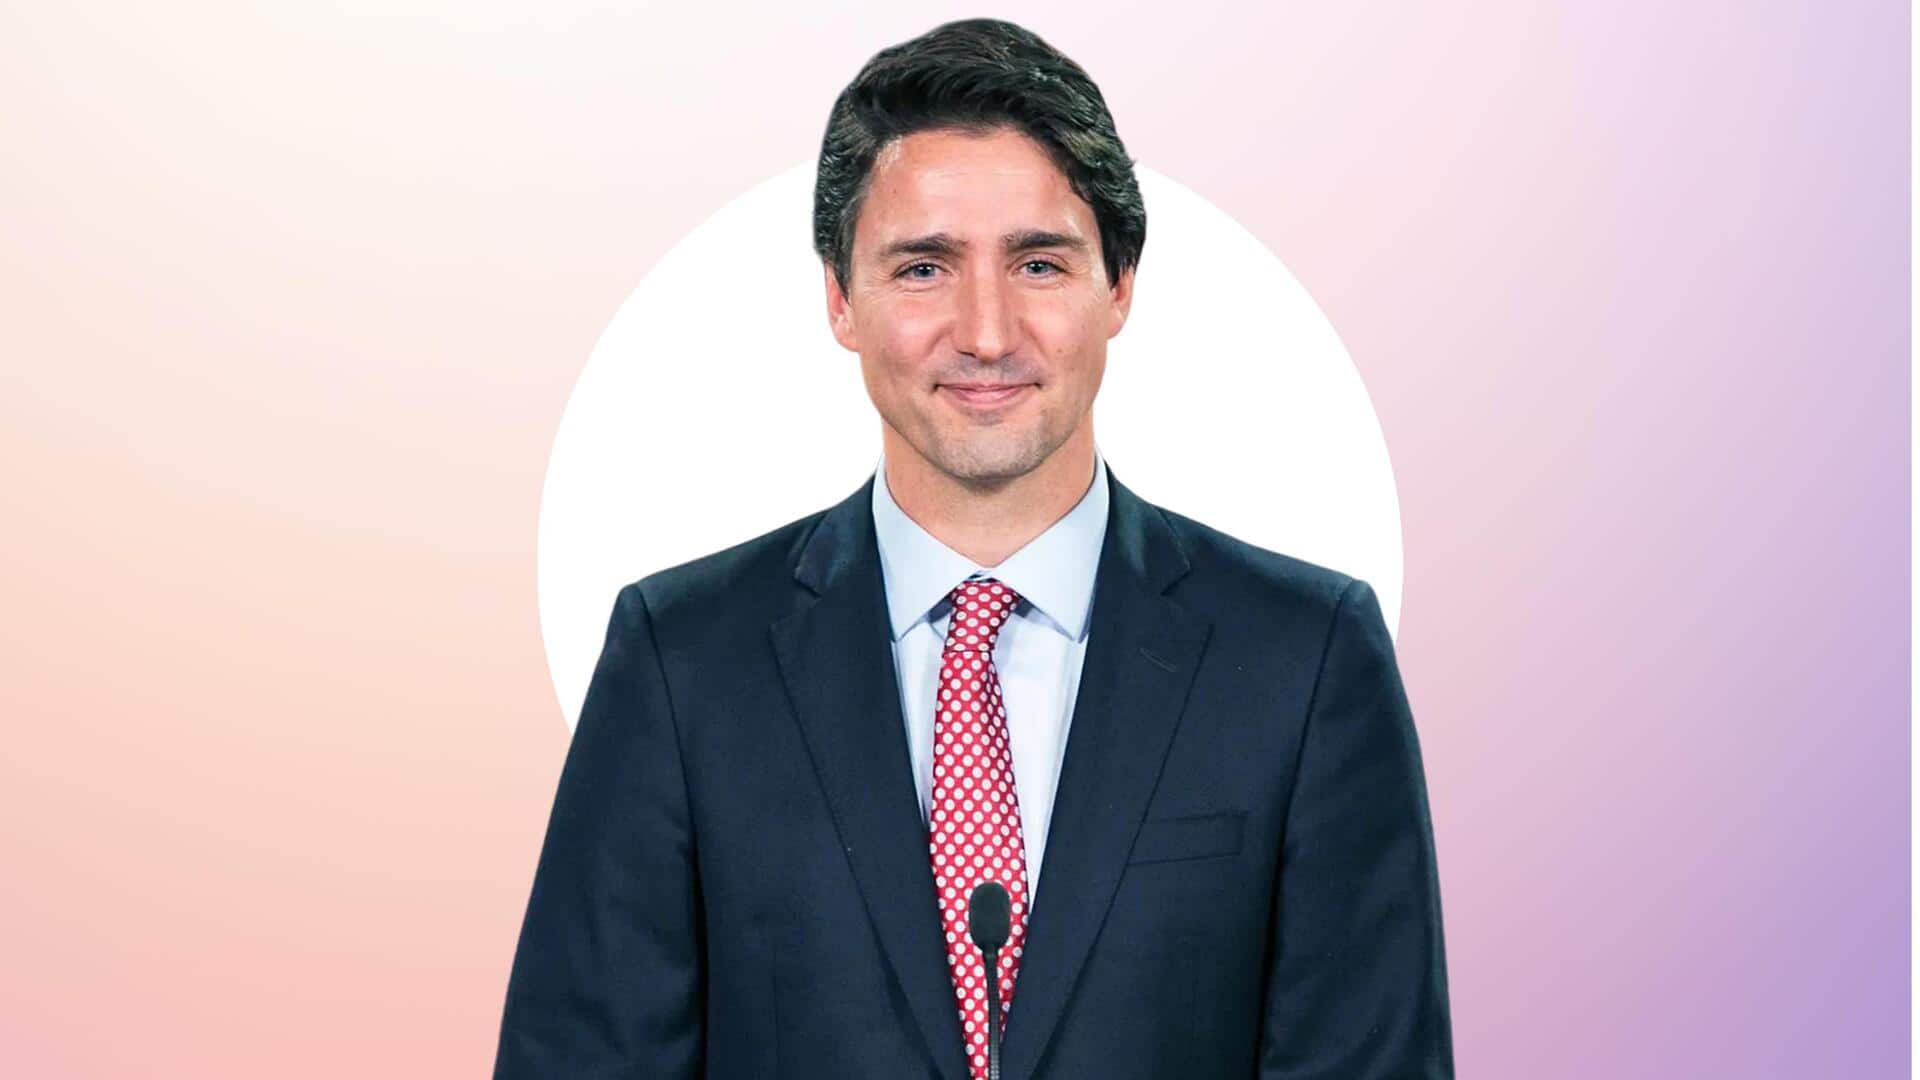 Tried to work constructively, positively: Justin Trudeau on India-Canada row